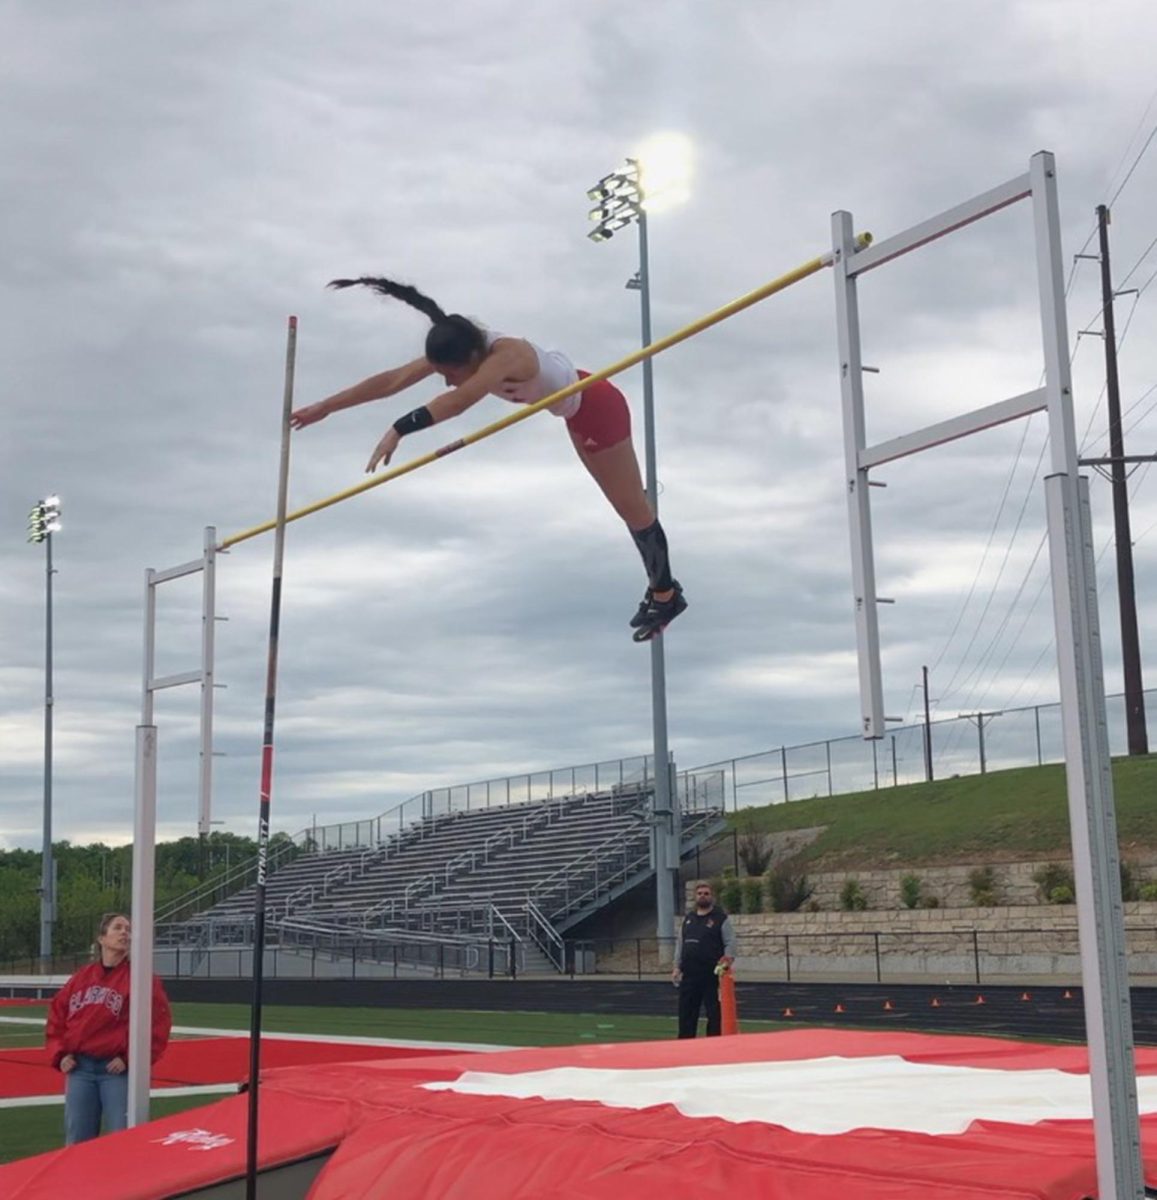 Sophomore+Bailey+Howard+has+broken+all+school+records+in+the+pole+vault+event.+She+will+compete+at+the+state+track+meet+on+June+1.